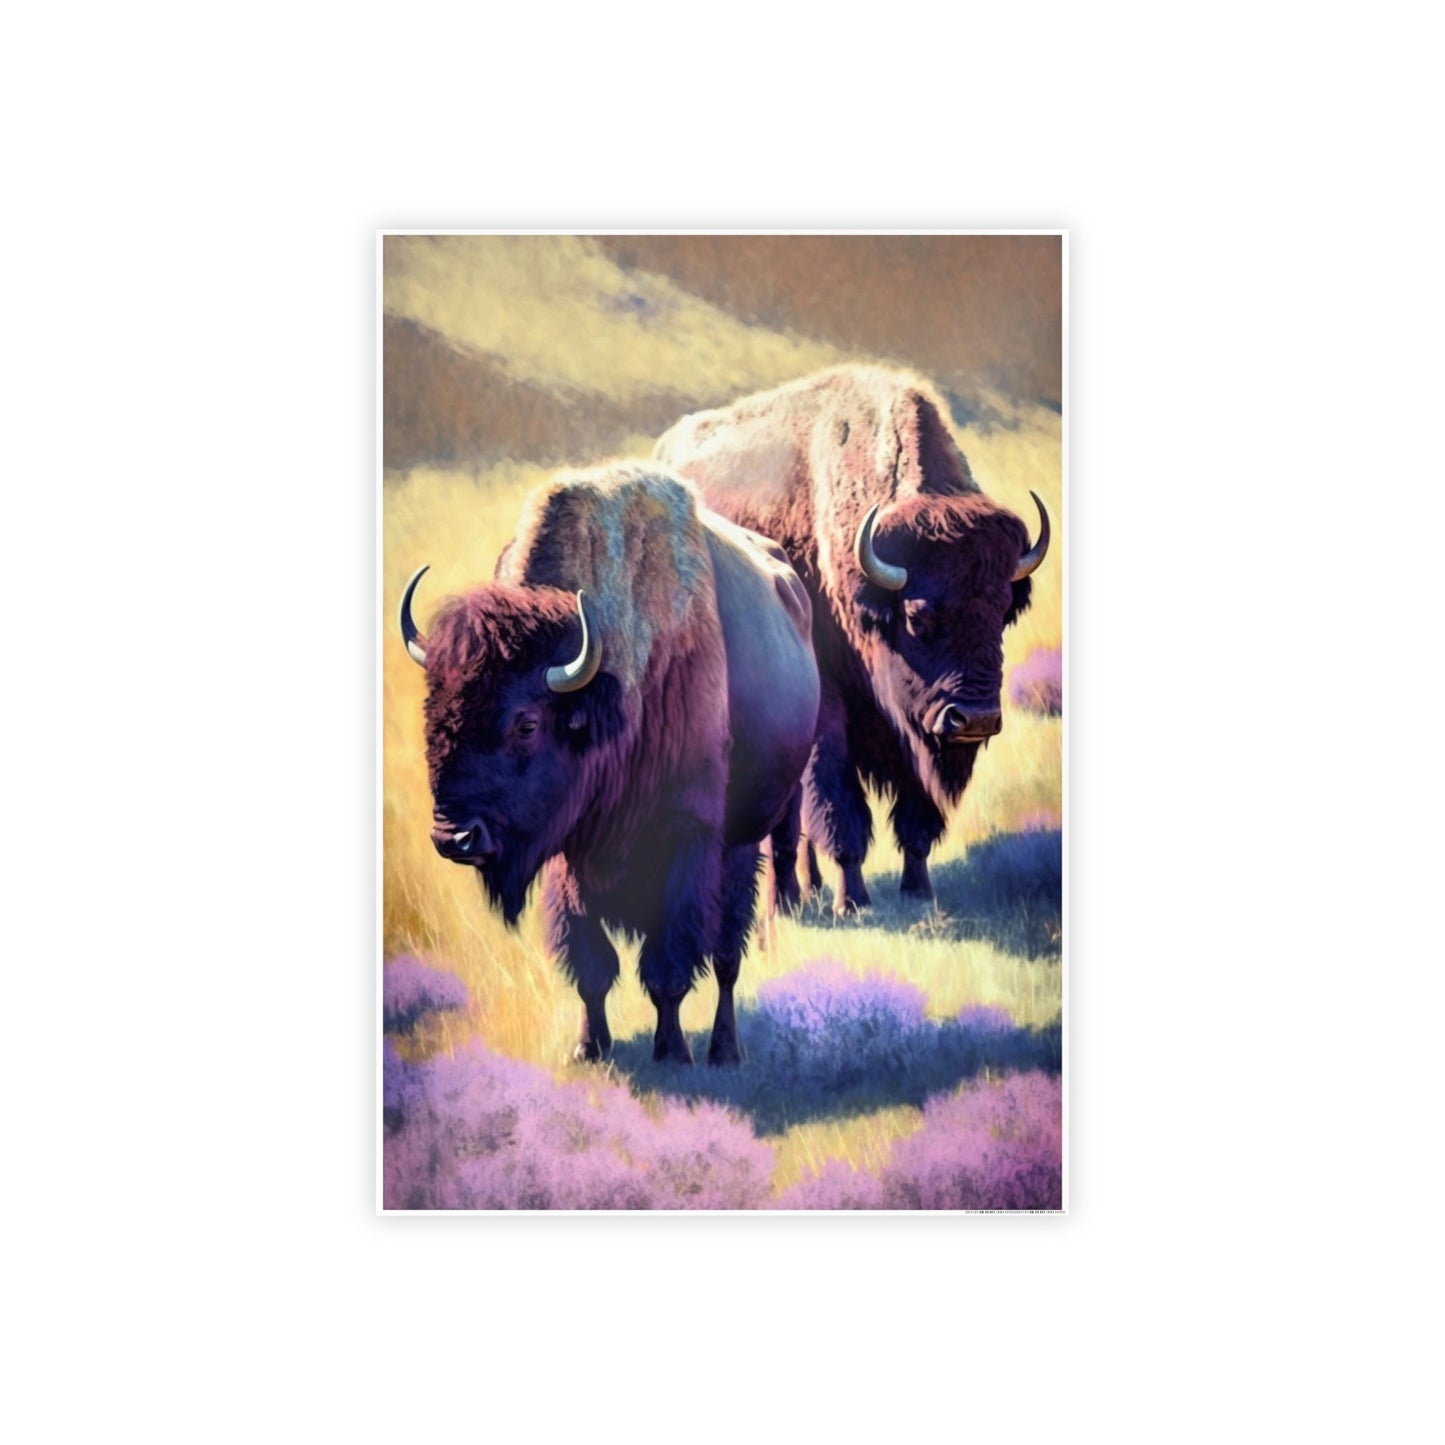 The Bison's Strength: Canvas & Poster Wall Art of a Bisons Displaying Its Might